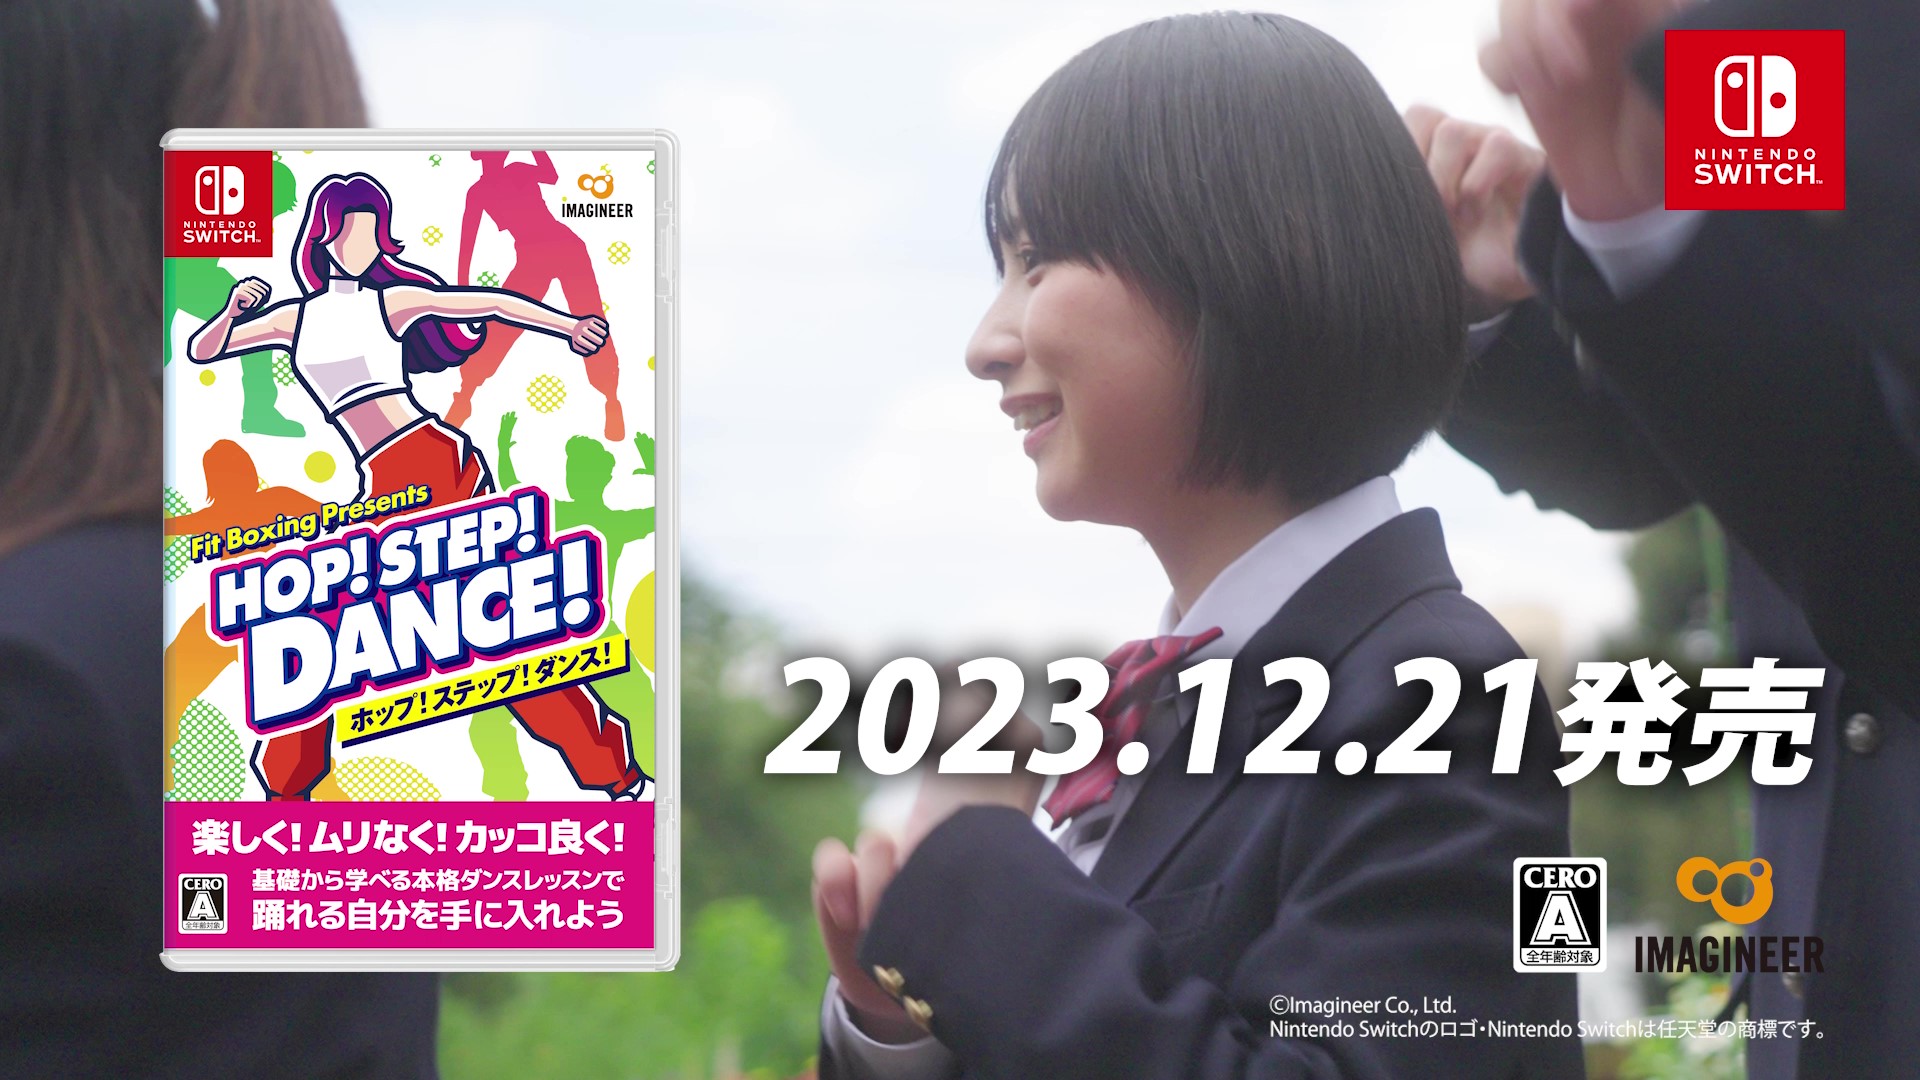 Nintendo Switch ソフトFit Boxing Presents「HOP! STEP! DANCE!」発売決定のお知らせ2